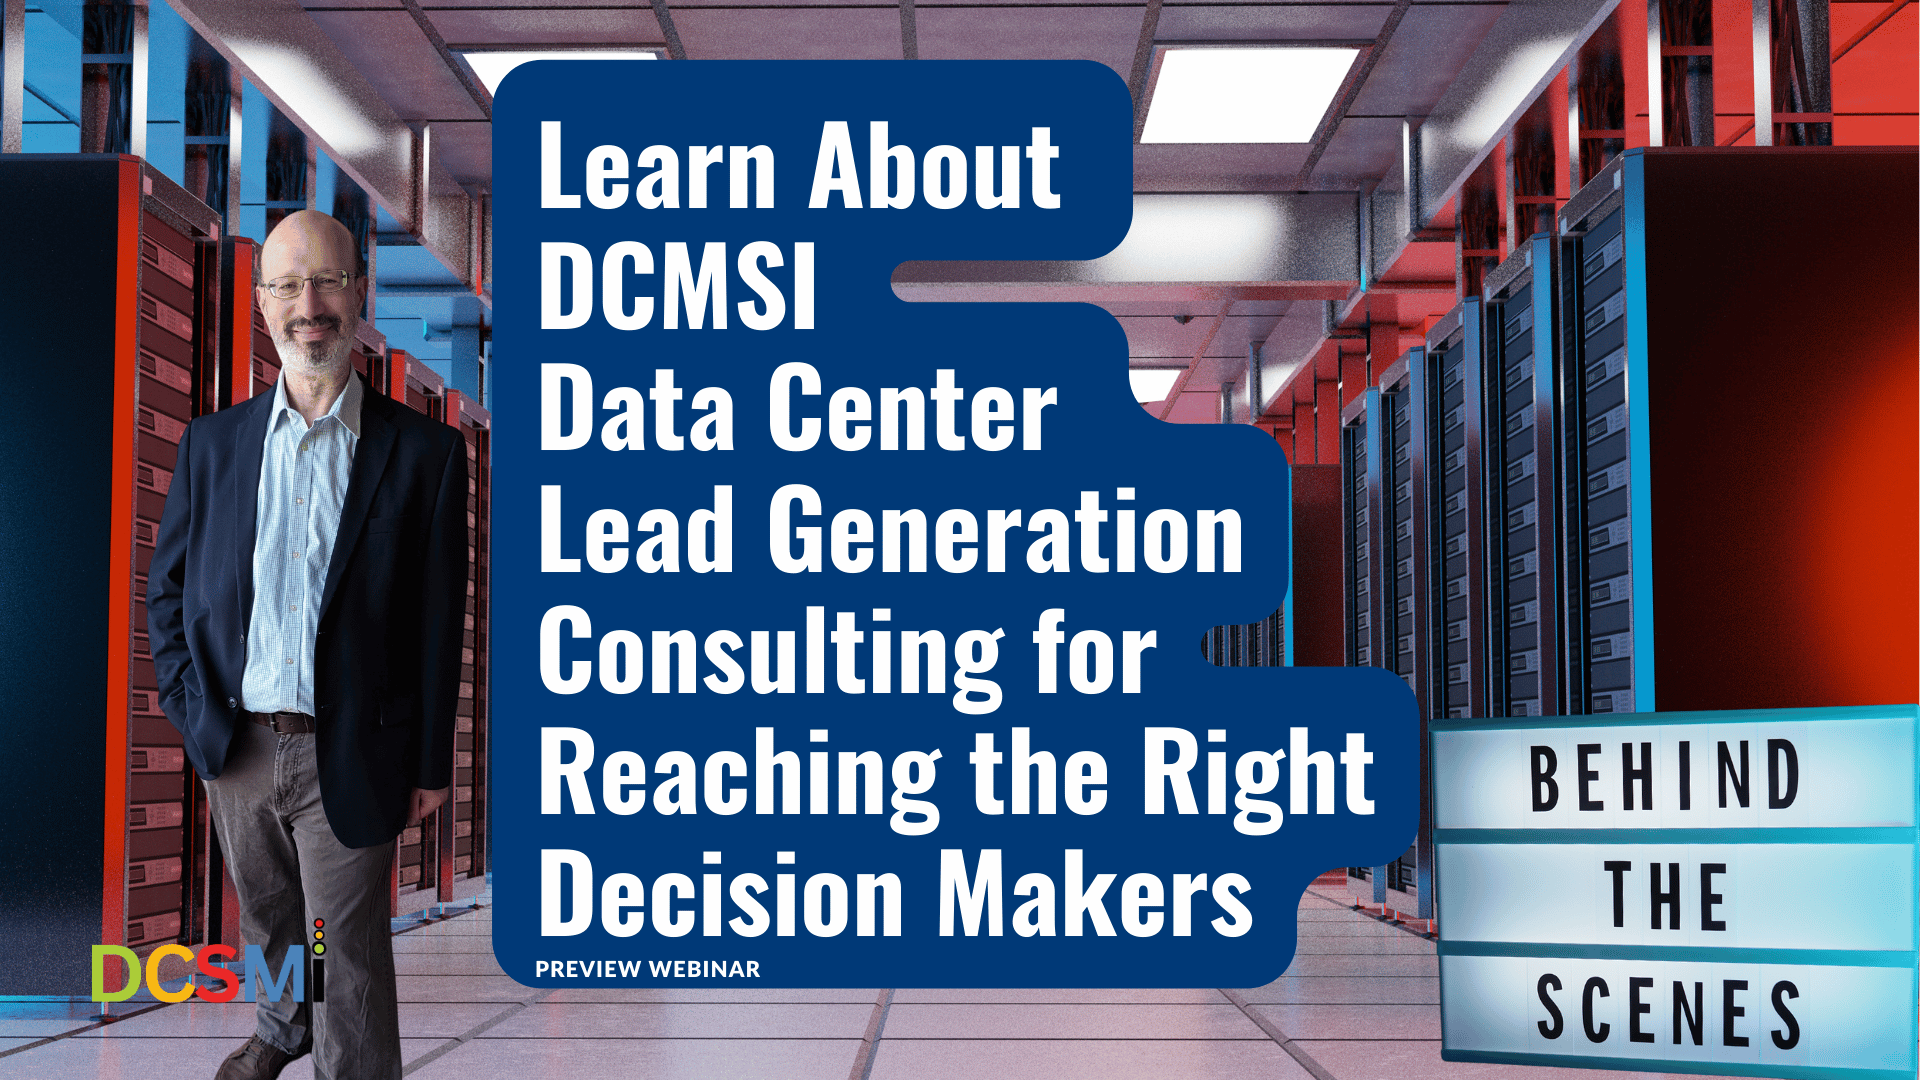 Learn About DCMSI Data Center Lead Generation Consulting for Reaching the Right Decision Makers